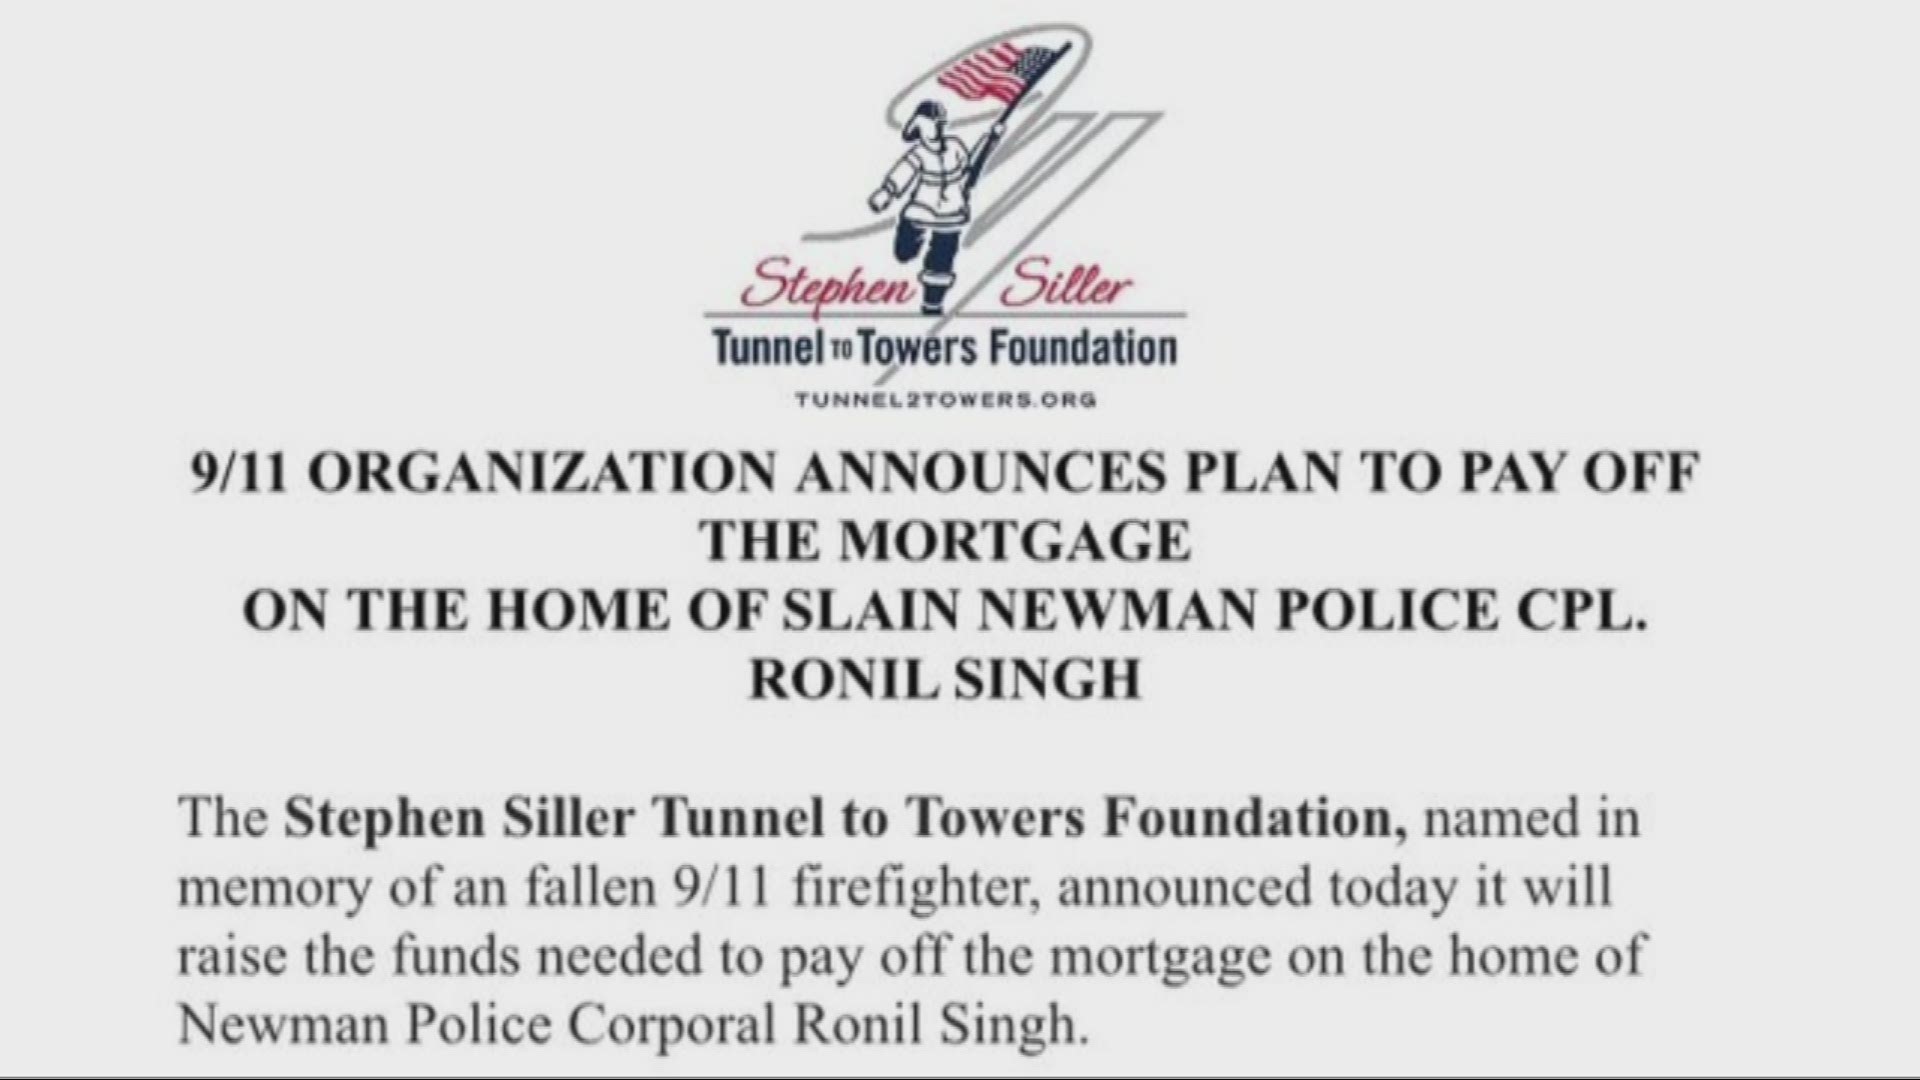 After losing a husband and father, the family of slain Cpl. Ronil Singh will have their mortgage paid off by an organization named in memory of a fallen 9/11 firefighter.